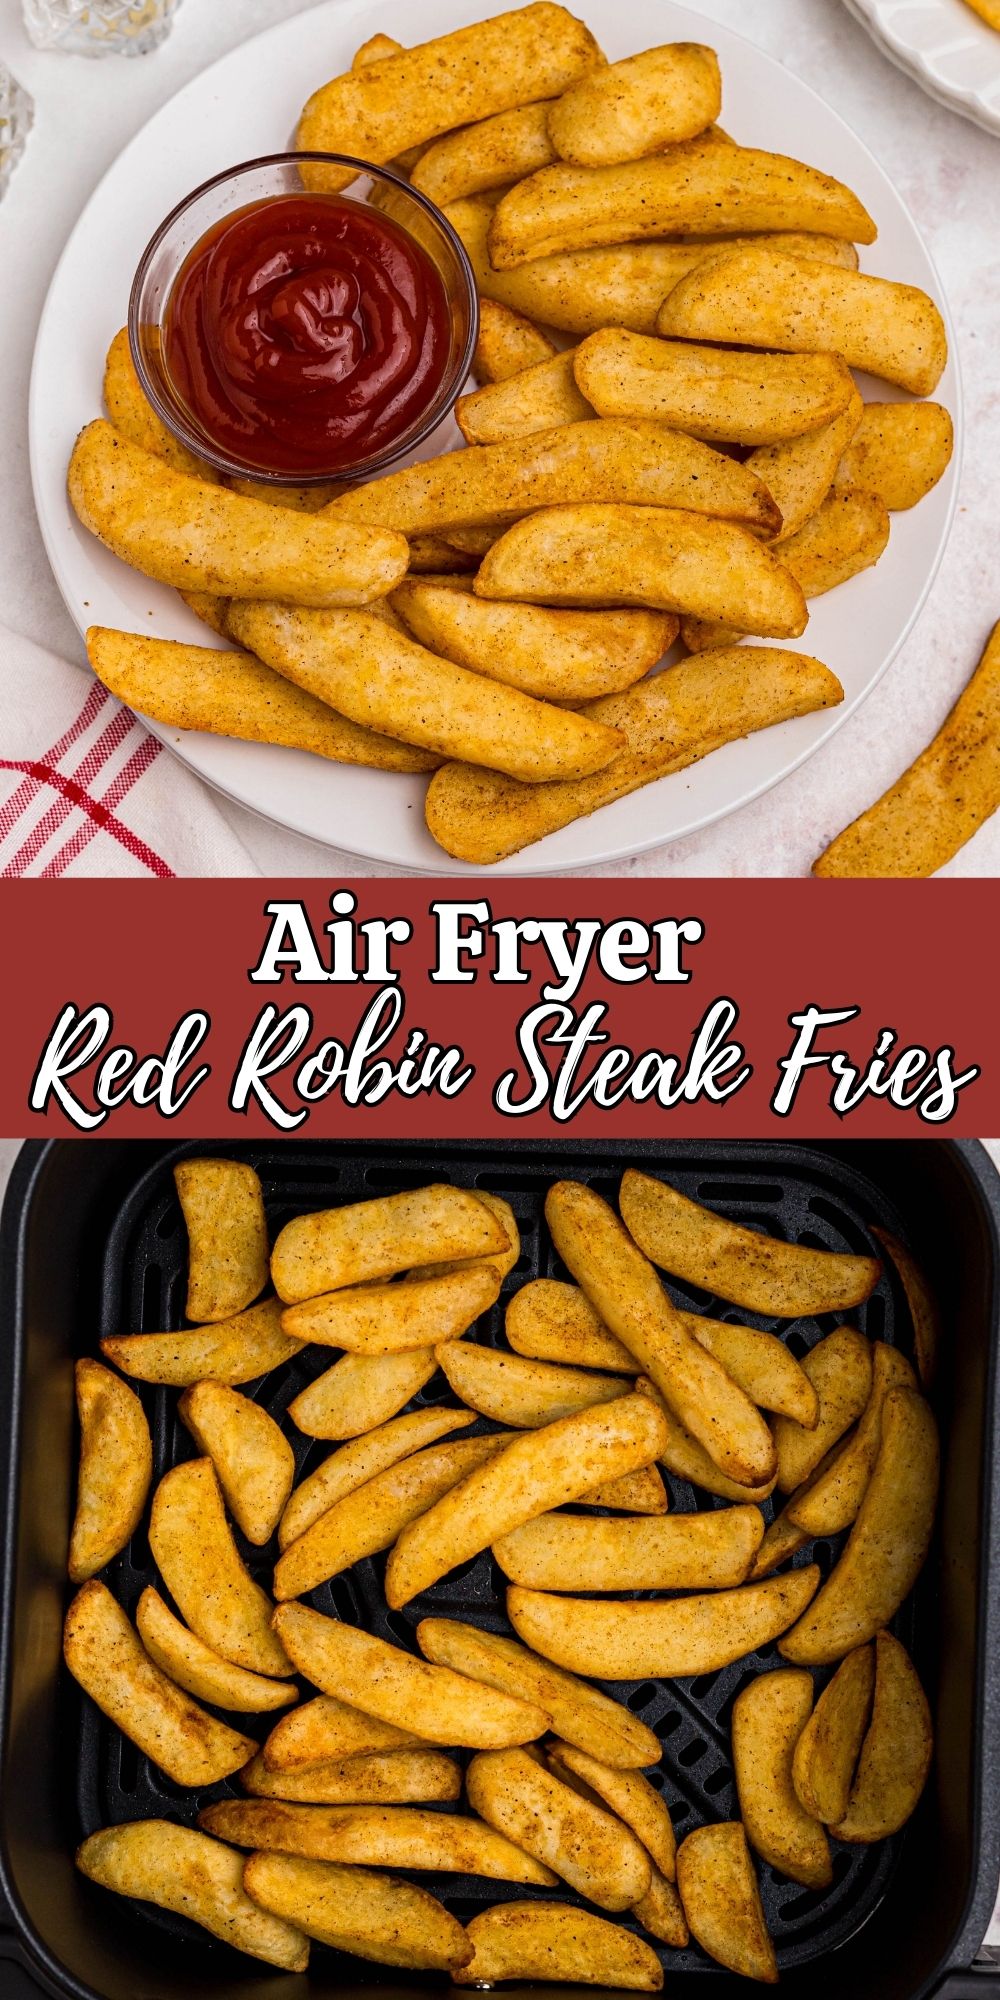 Red Robin Steak Fries in air fryer, are a classic side dish with a crispy texture with delicious flavors and seasoned salt.